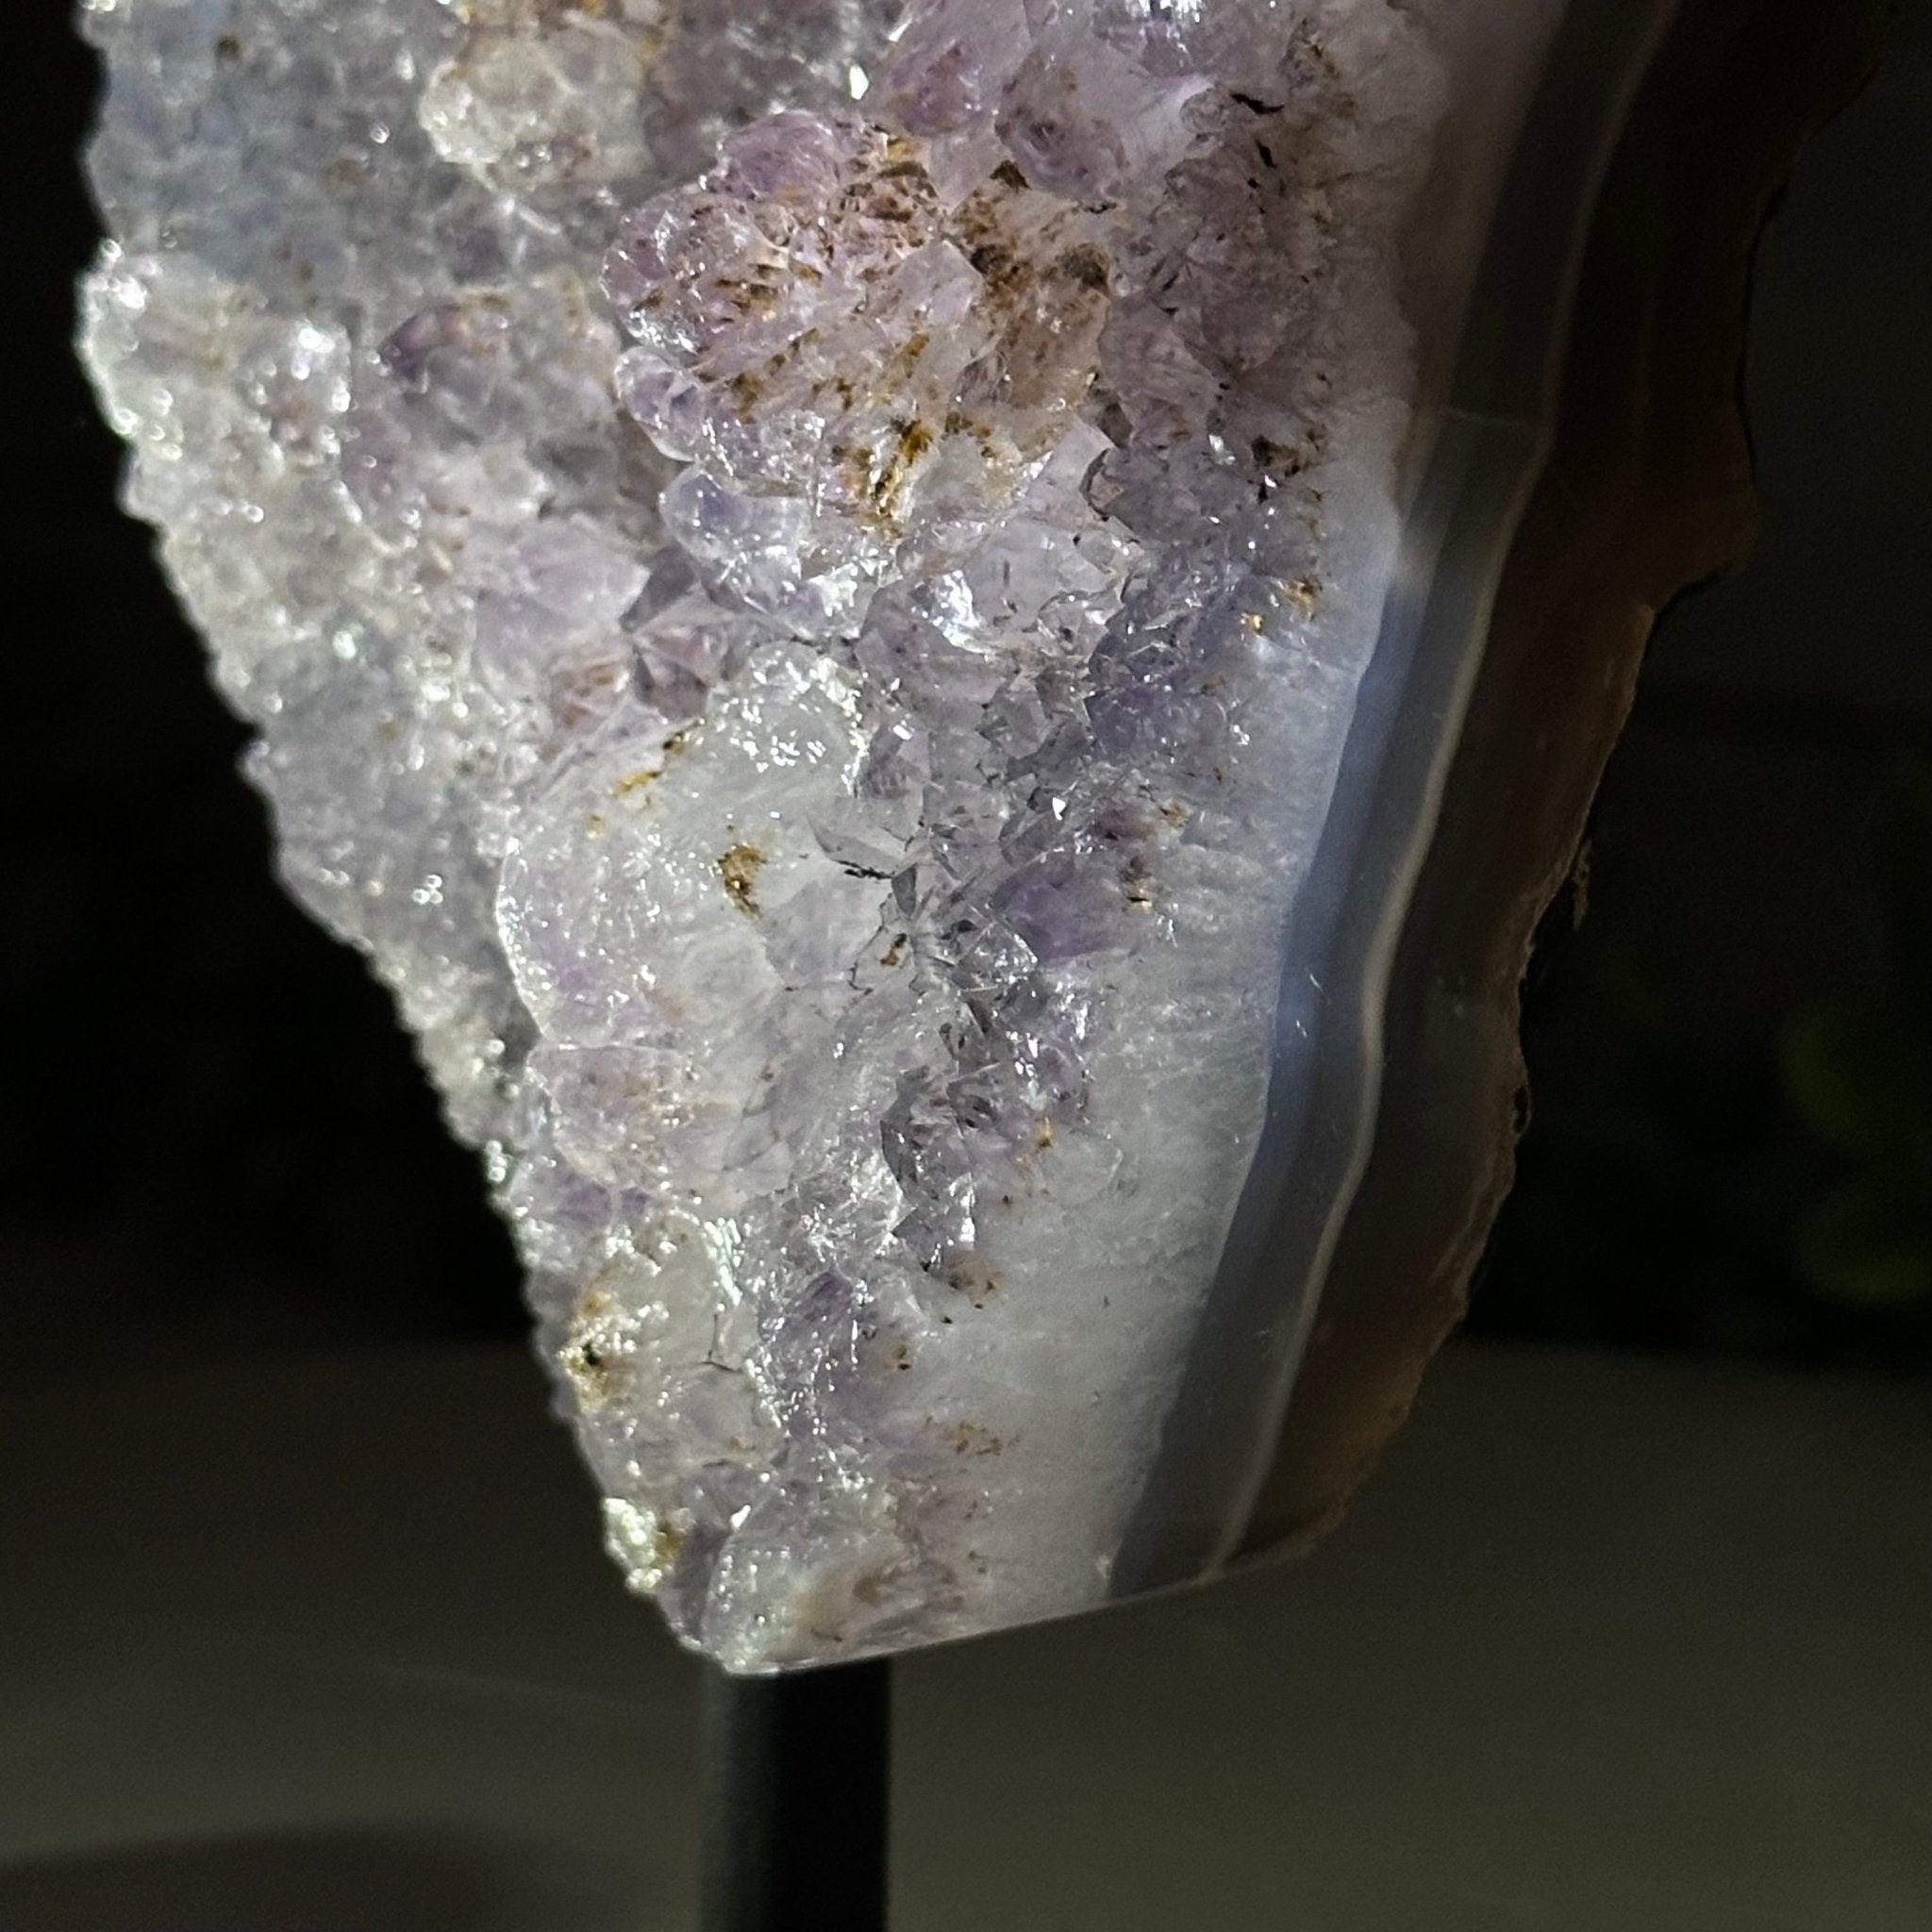 Amethyst Cluster on a Metal Base, 2.1 lbs & 8" Tall #5491-0163 - Brazil GemsBrazil GemsAmethyst Cluster on a Metal Base, 2.1 lbs & 8" Tall #5491-0163Clusters on Fixed Bases5491-0163